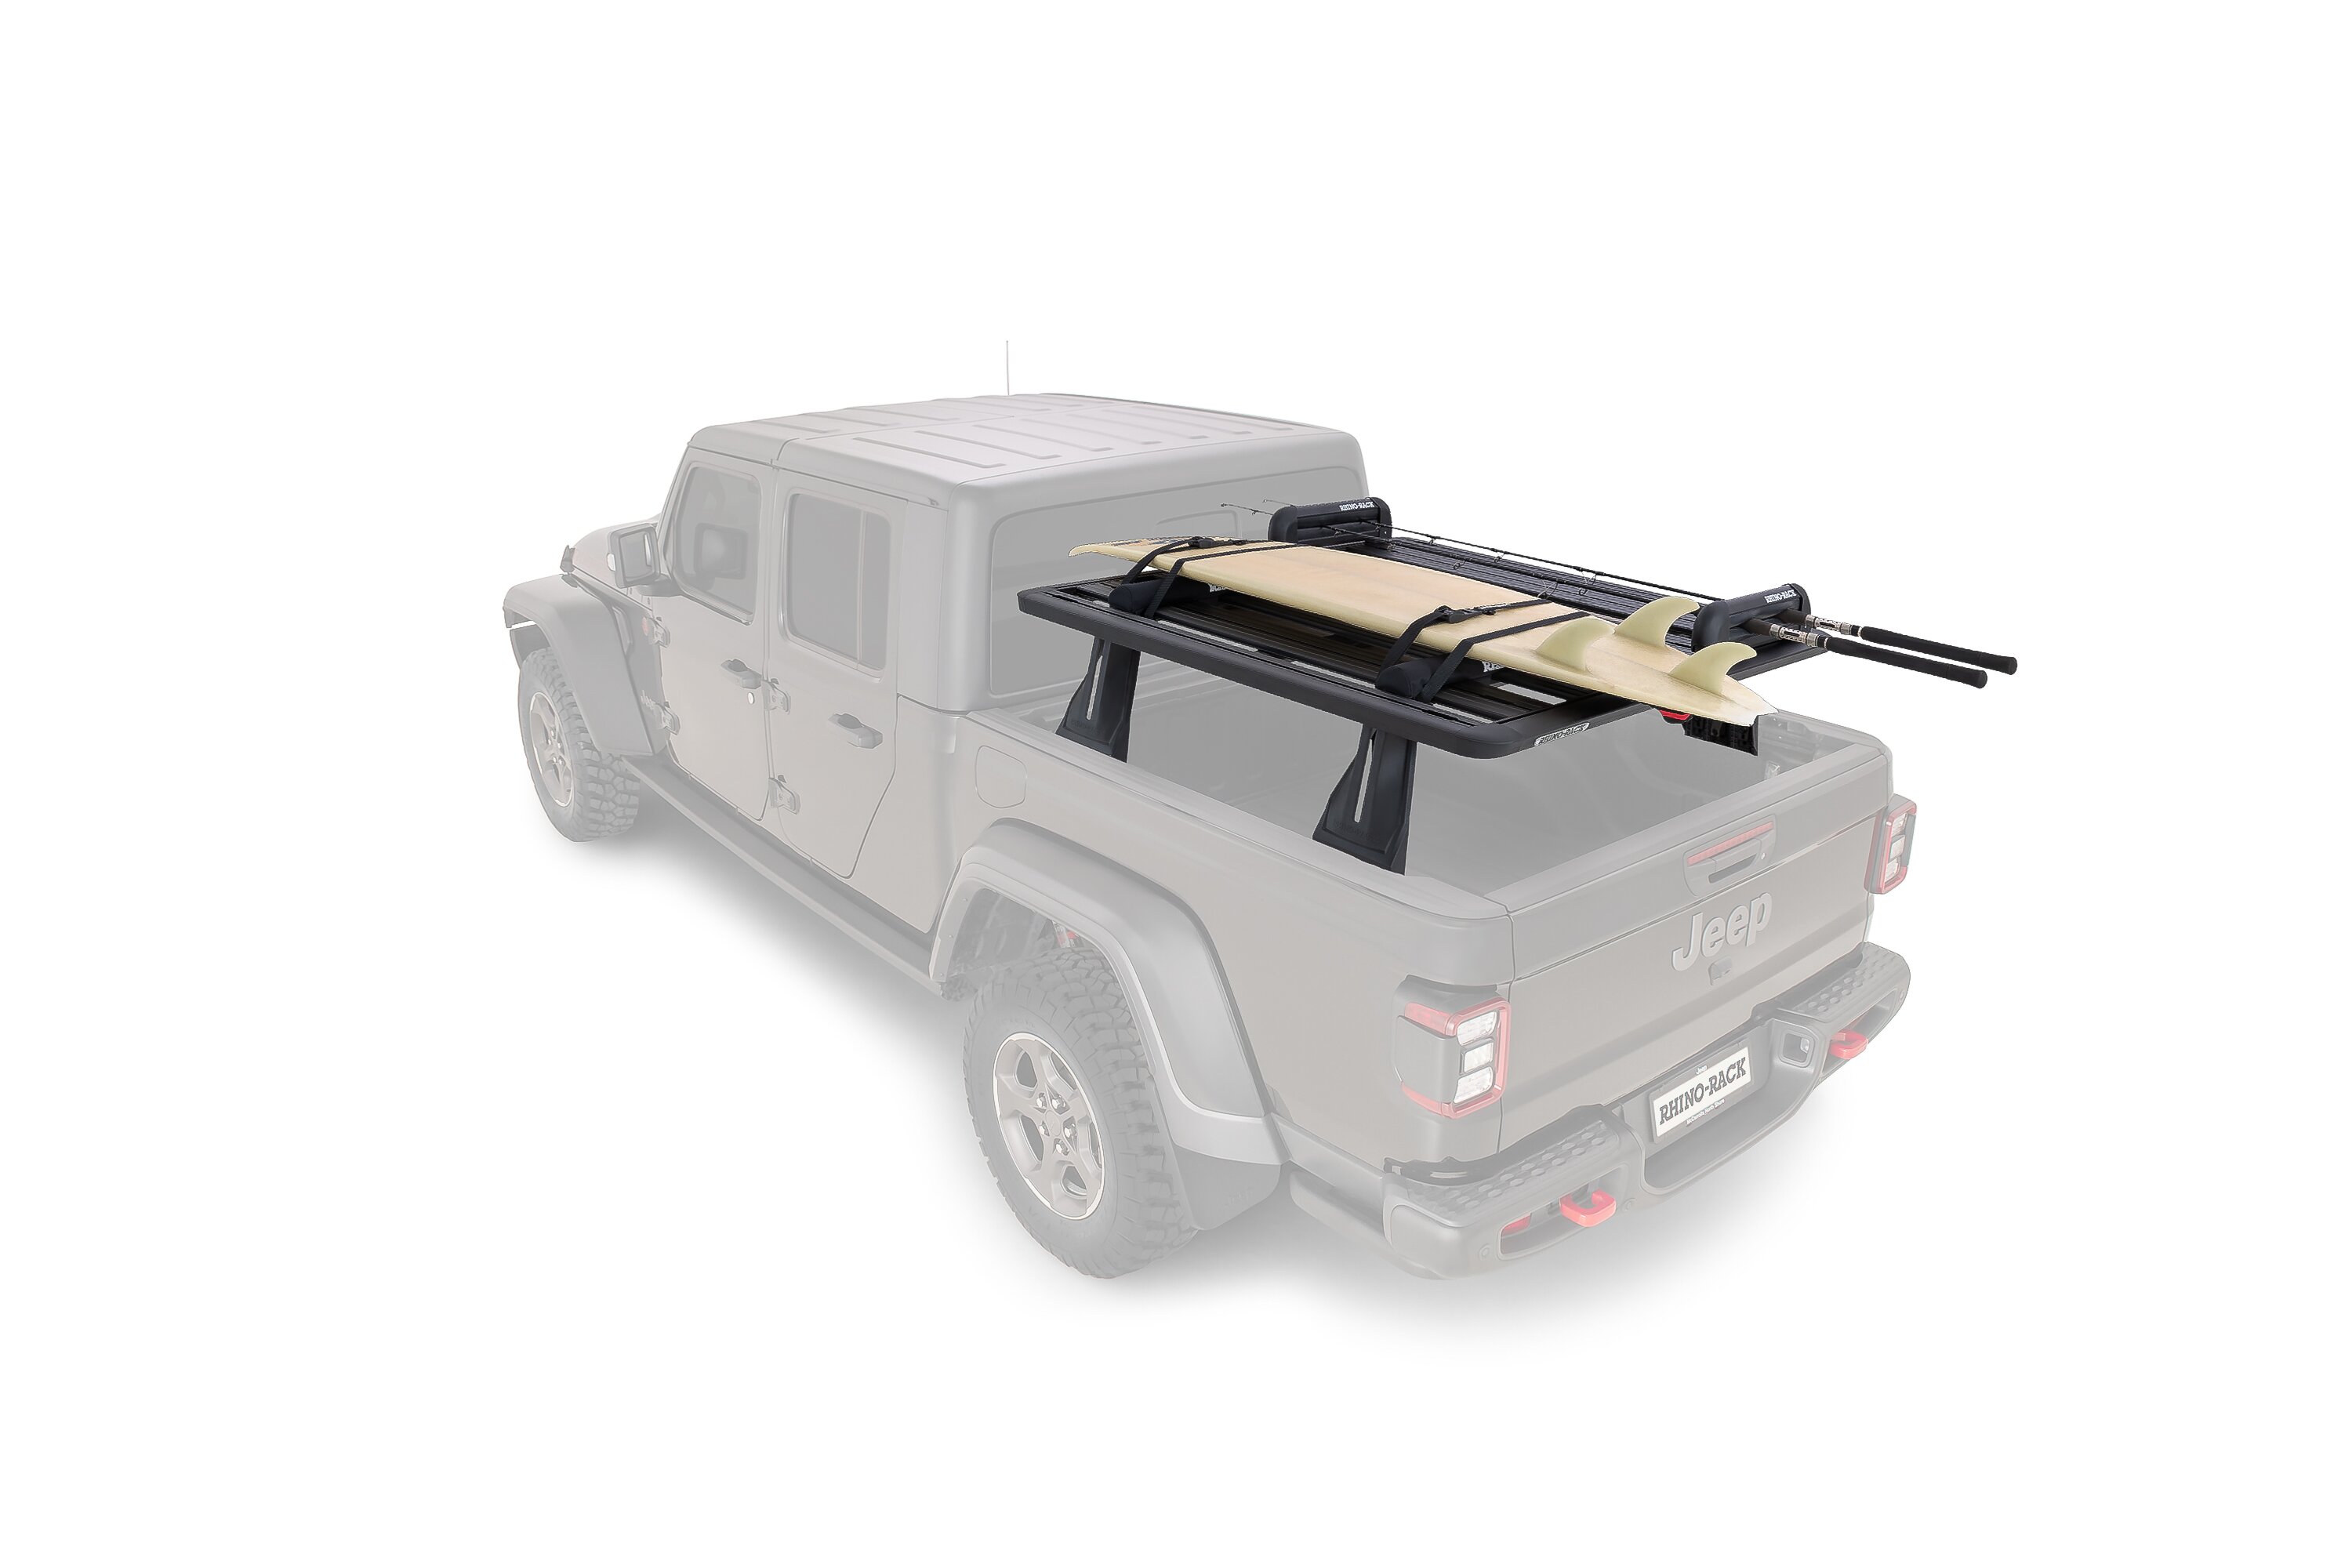 Reconn-Deck - Introducing Rhino-Rack's versatile truck bed system.